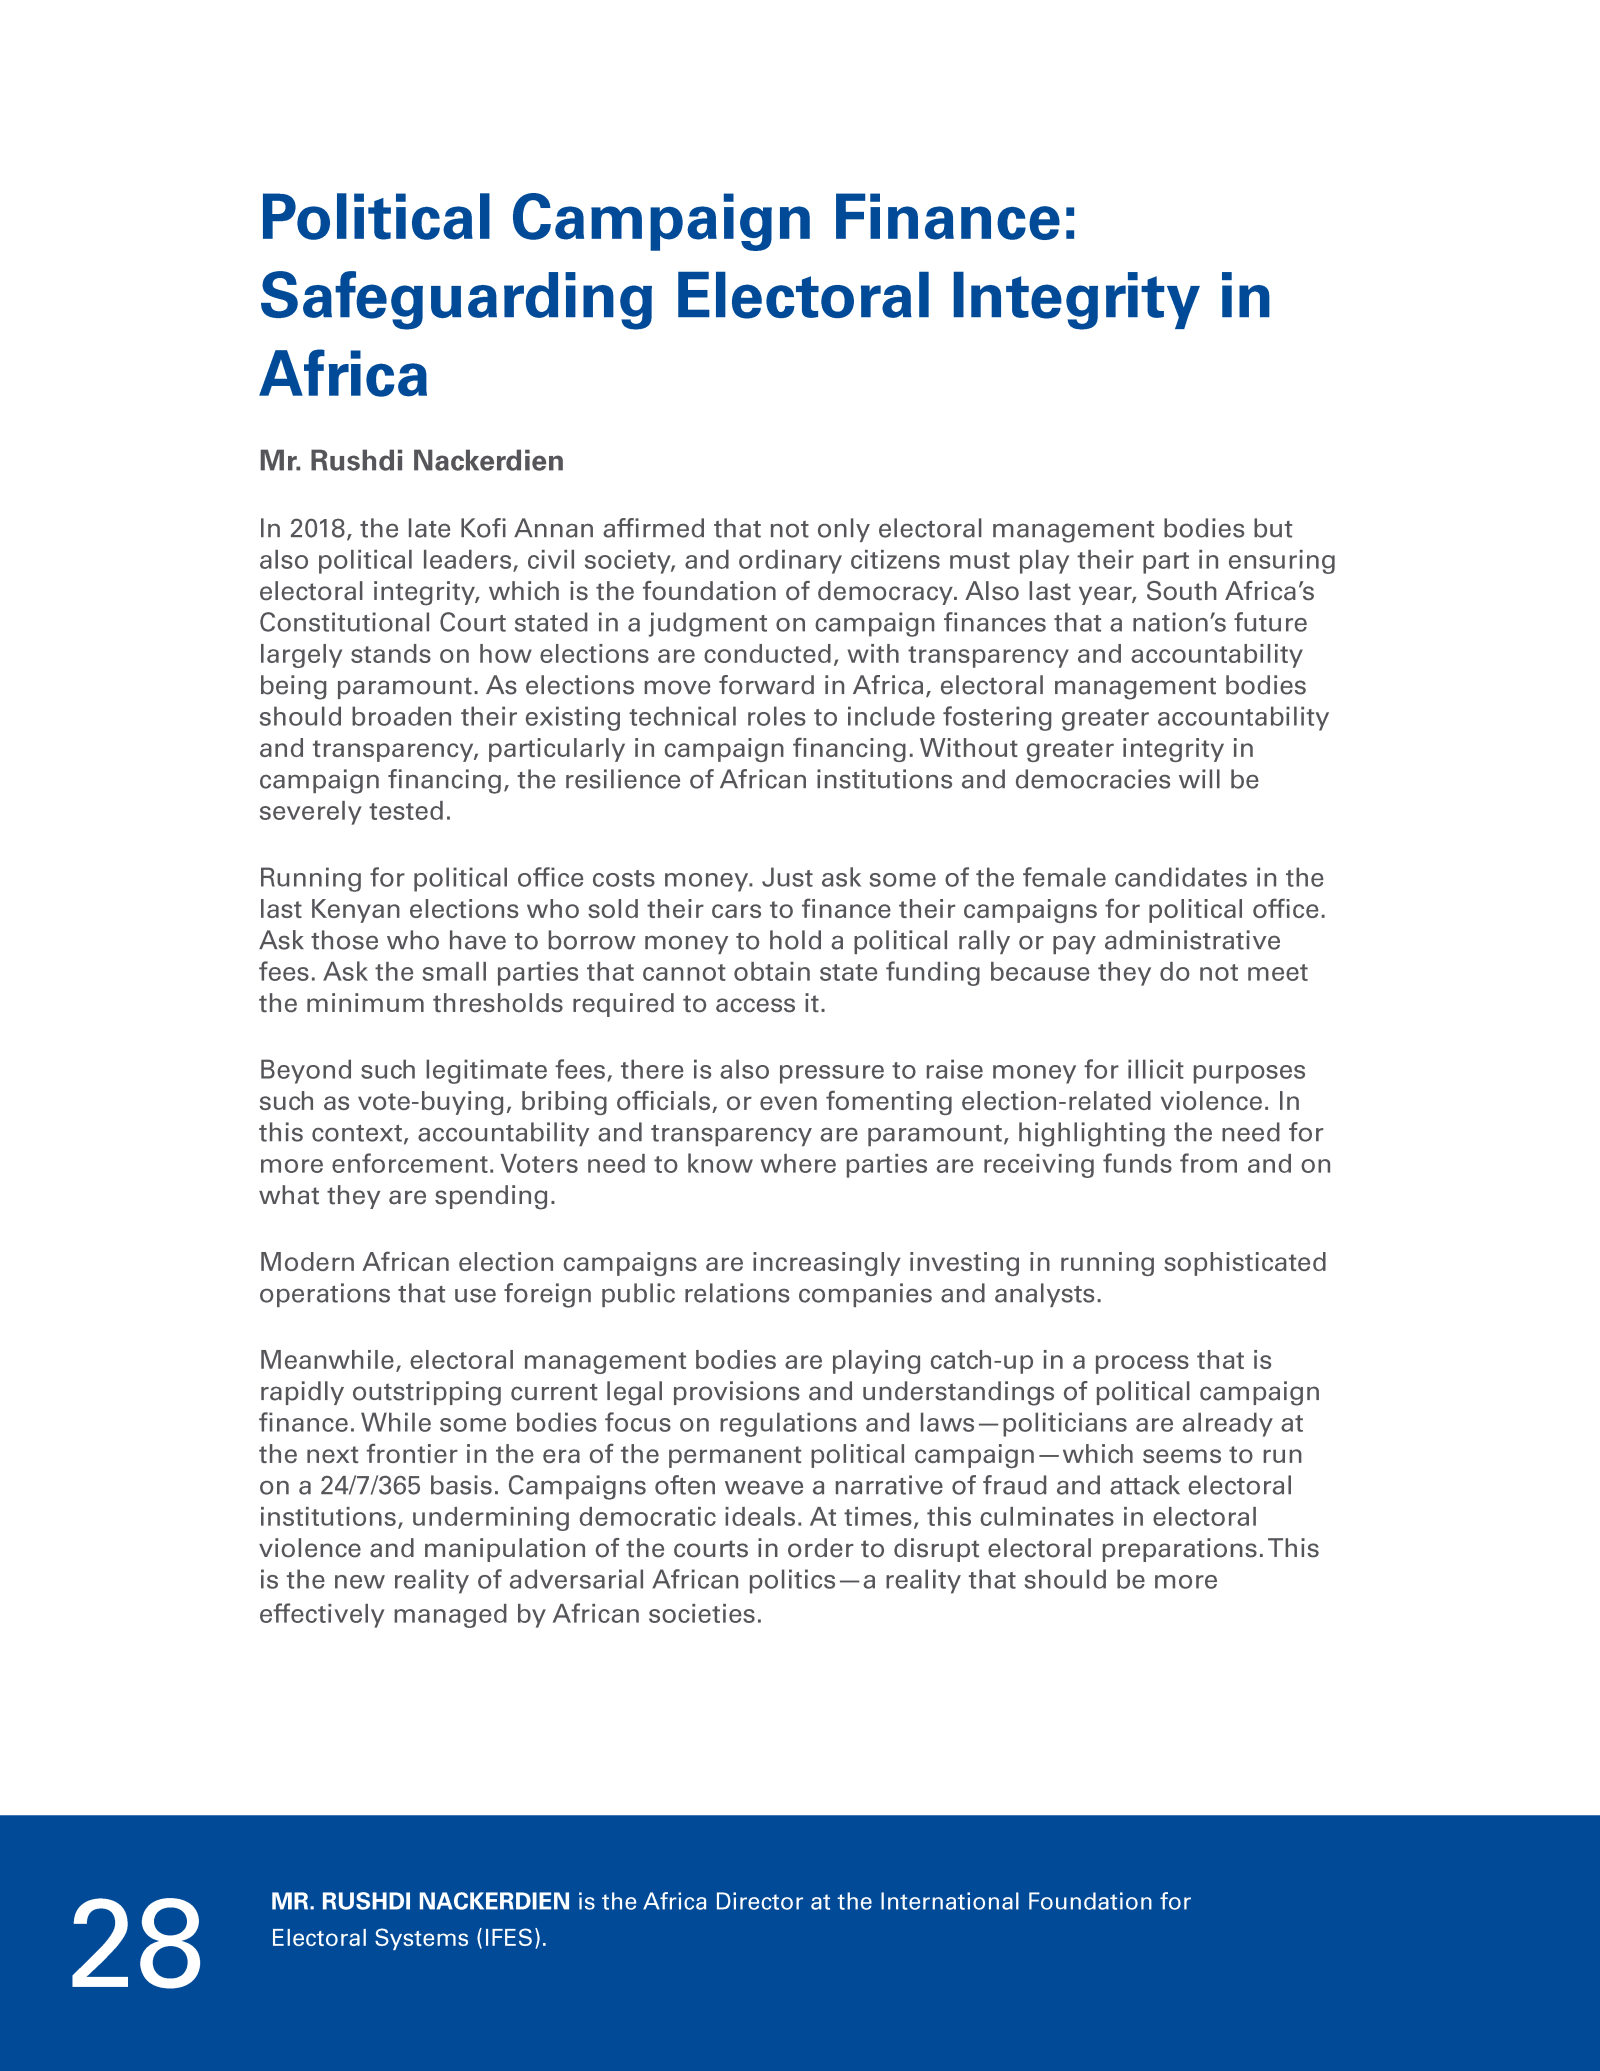 Political Campaign Finance: Safeguarding Electoral Integrity in Africa